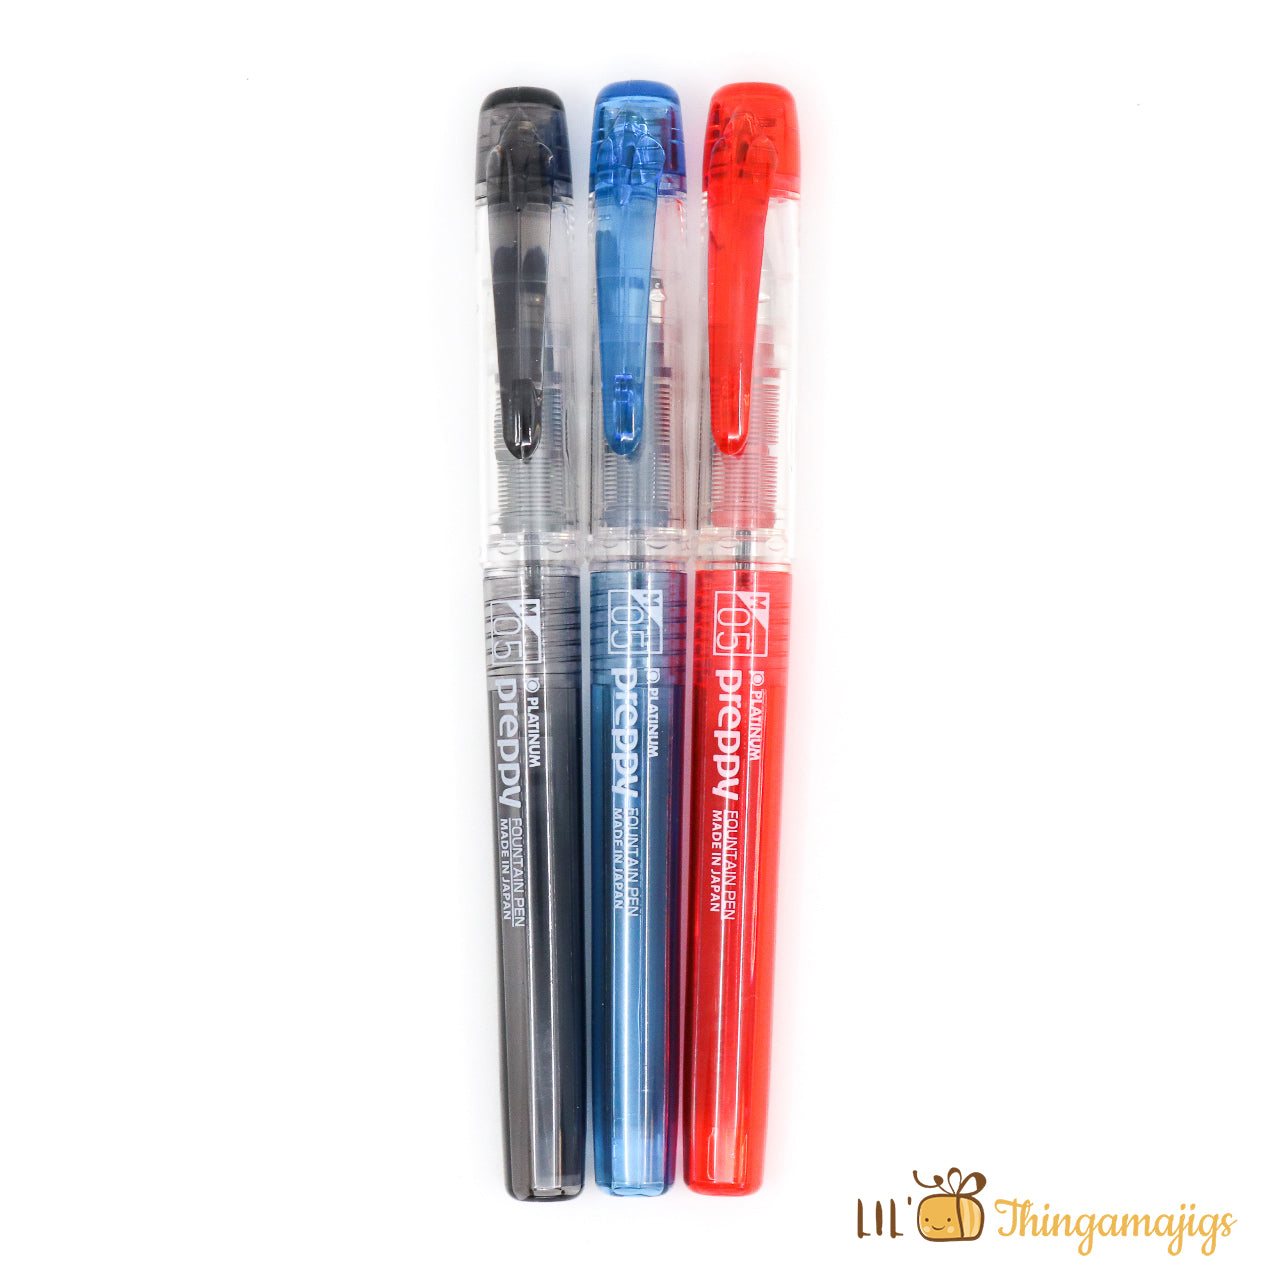 Lil Thingamajigs Online Shop - Pilot Frixion Gelpen - 0.5mm – Lil  Thingamajigs Hive